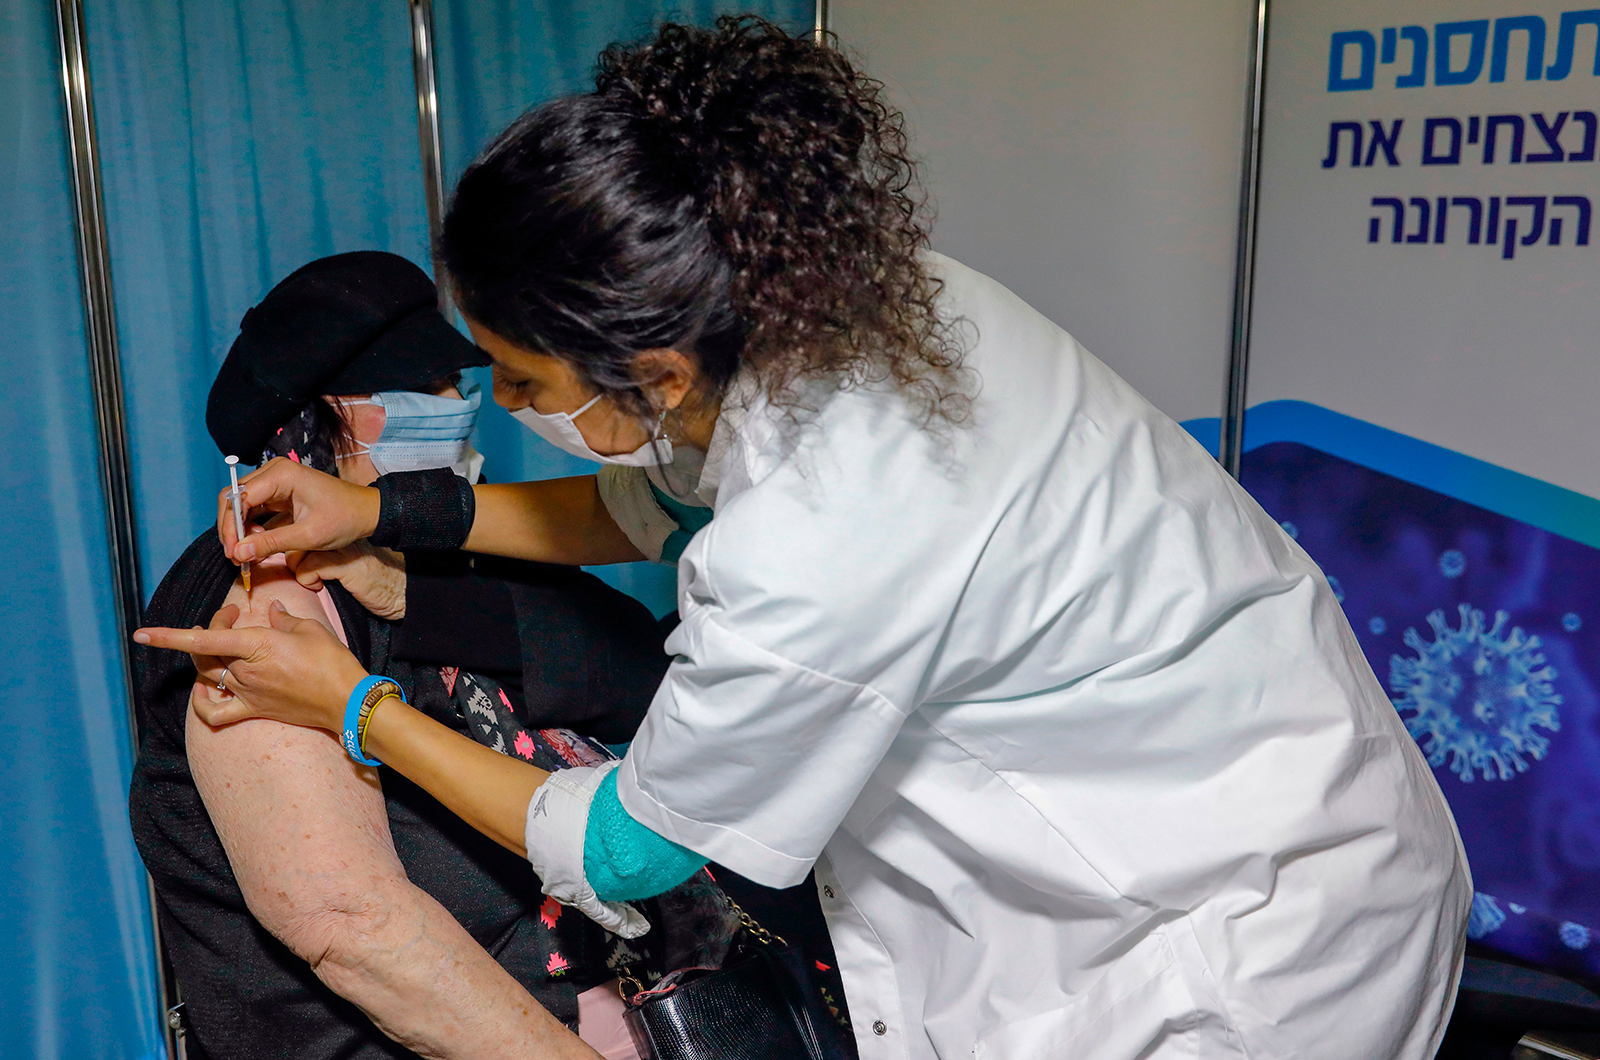 A Israeli healthcare worker administers a Covid-19 vaccine to a woman at the Kupat Holim Clalit clinic in Jerusalem, on January 14